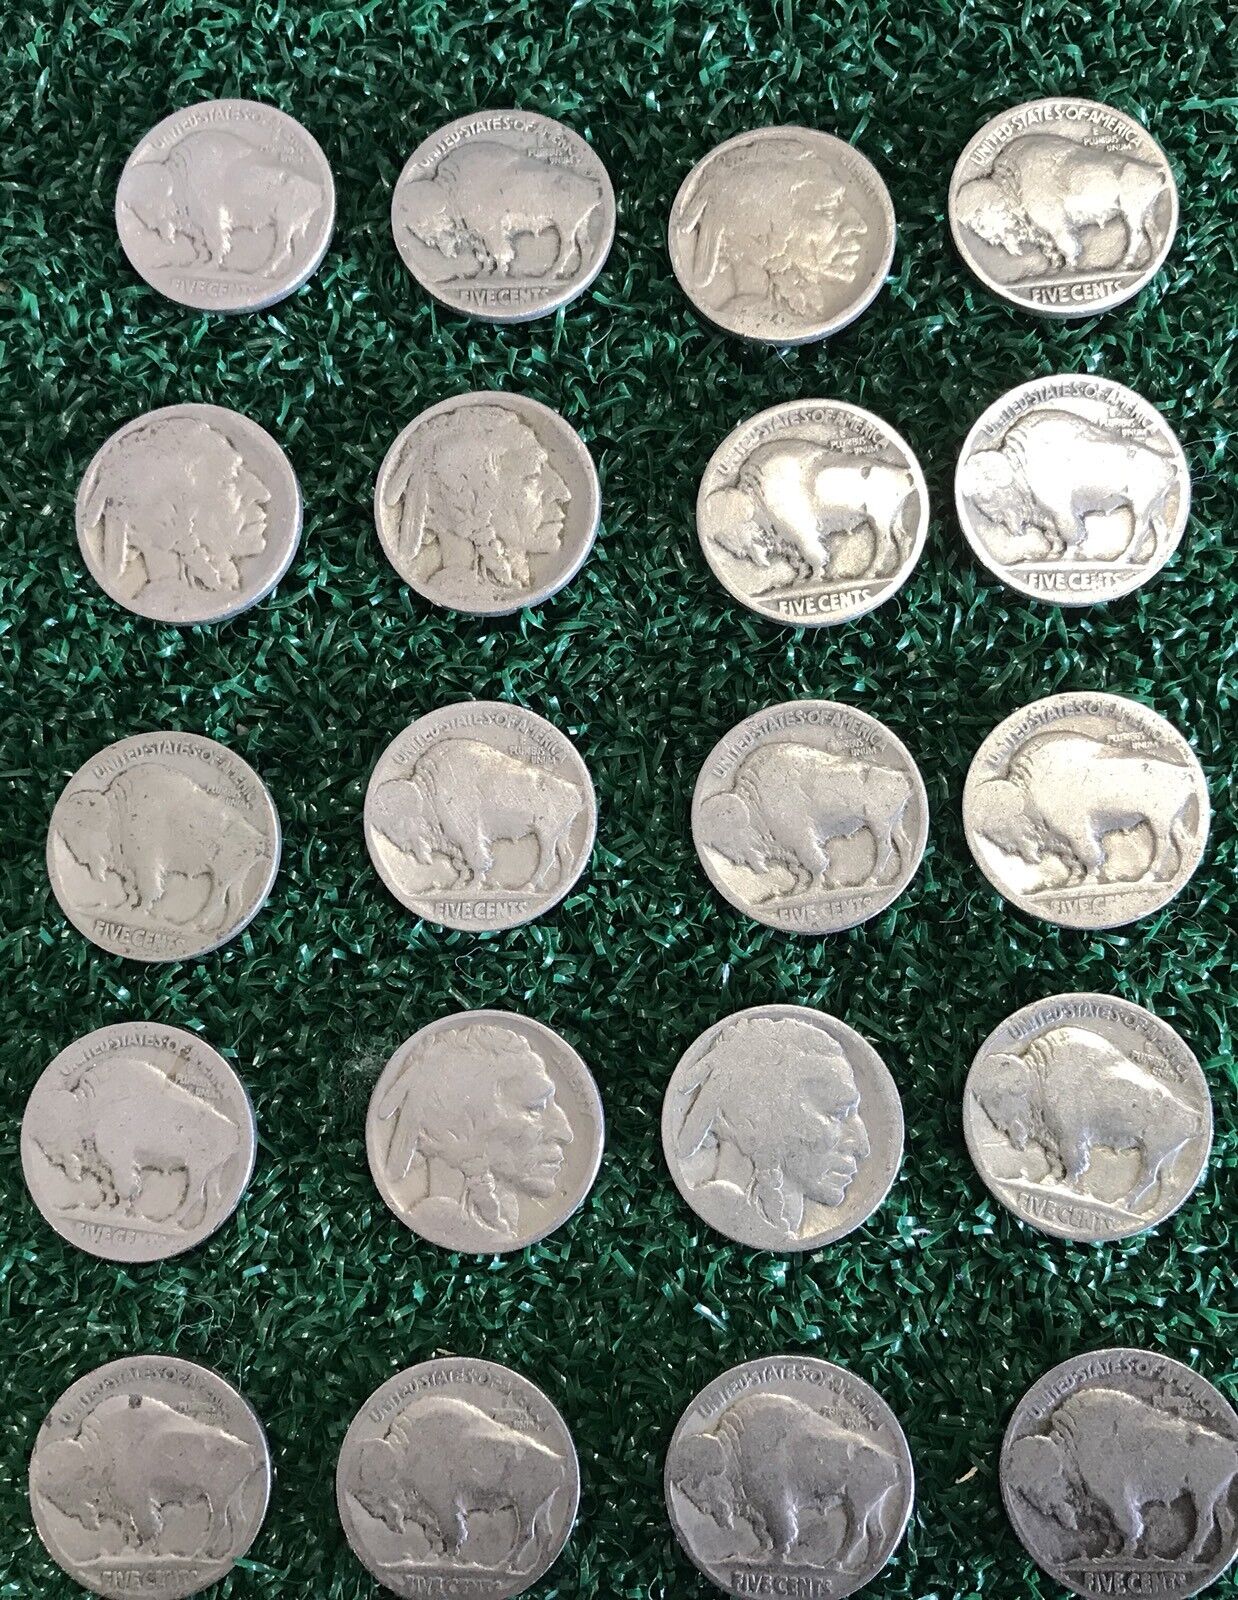 VINTAGE United States Coin Lot of 20 Buffalo Nickels 1913-1938 Dateless Fast Sh